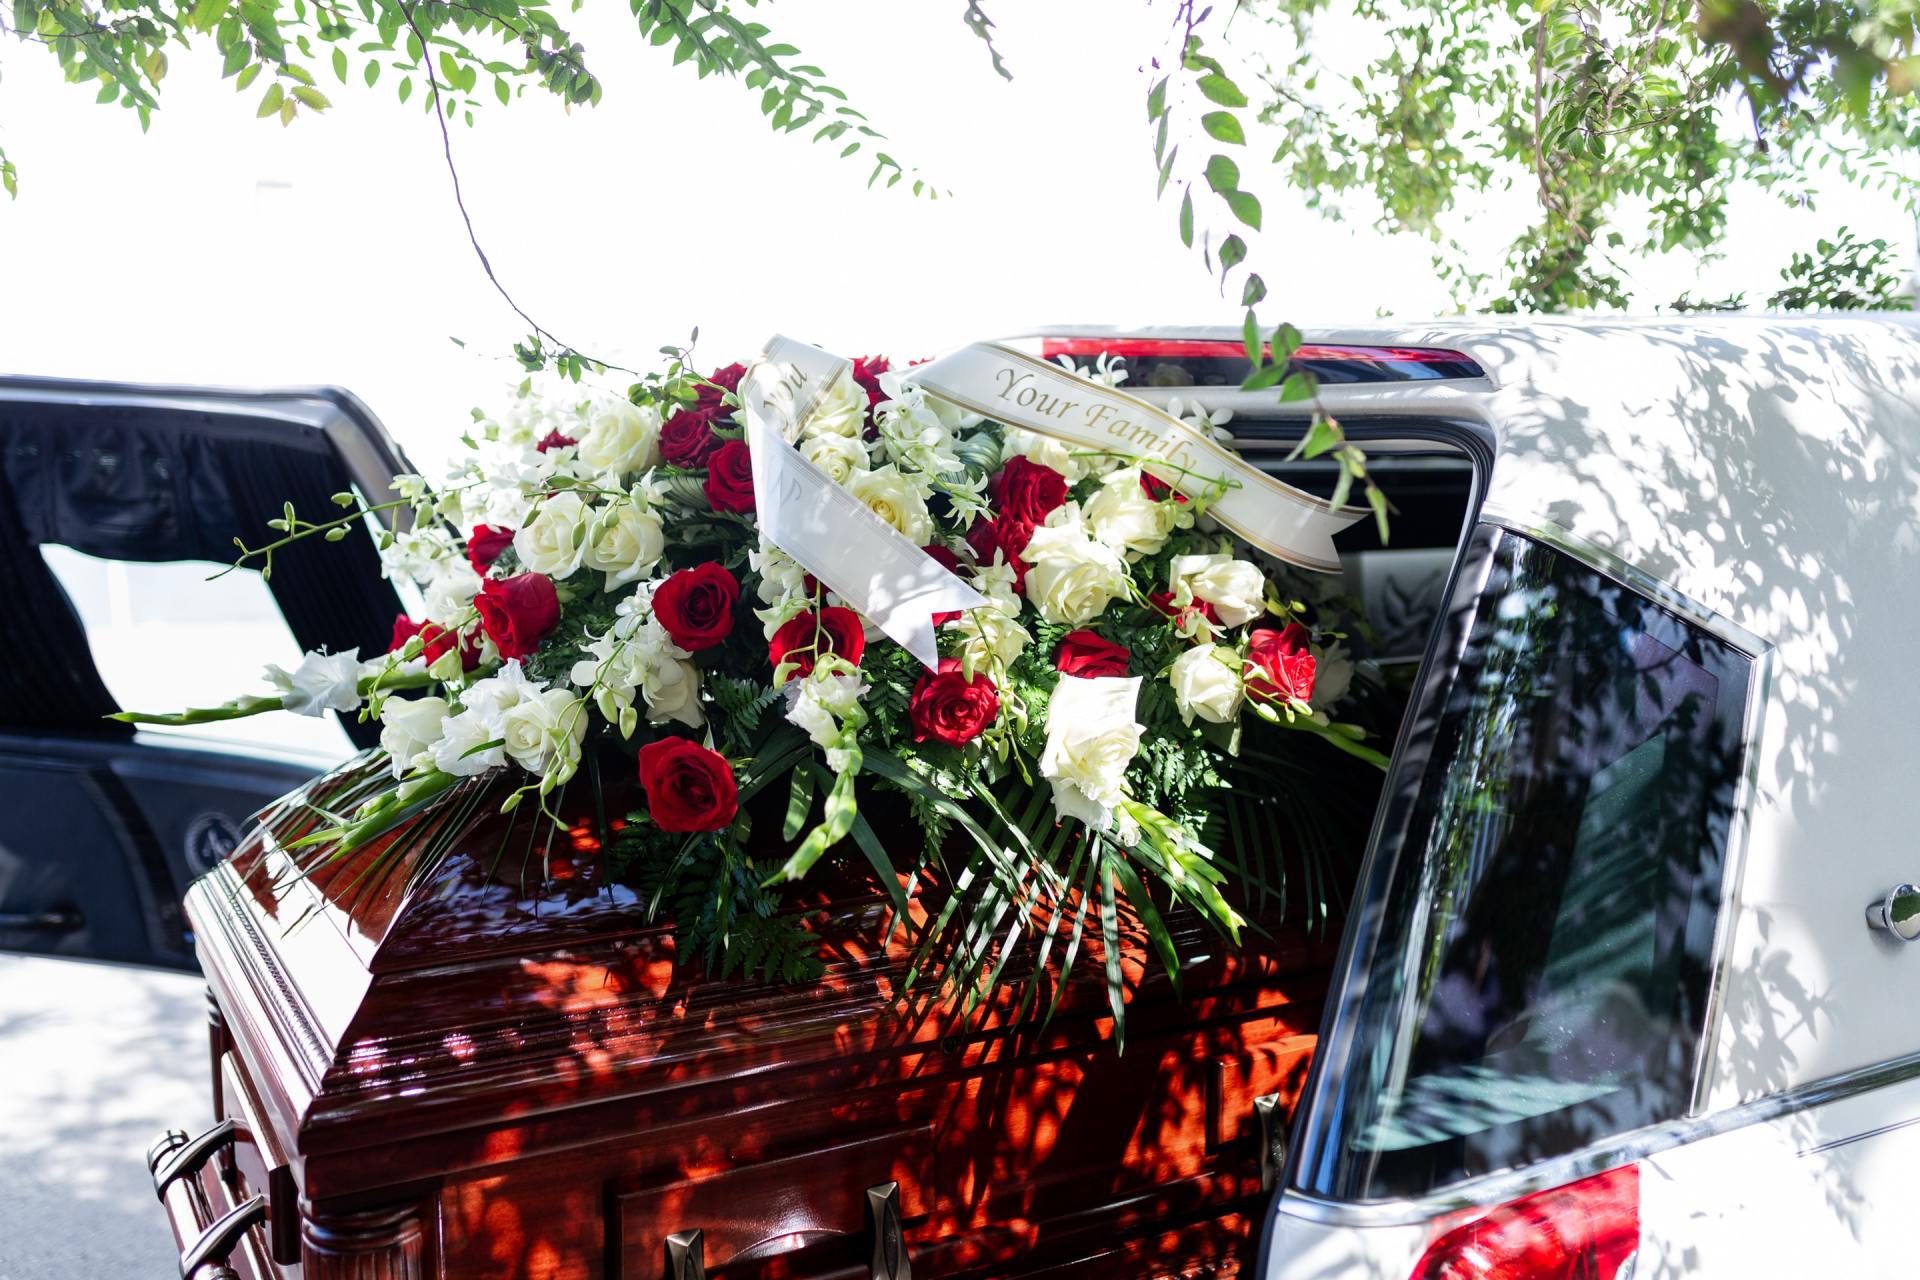 funerals near me, lic cremation service, long island funeral, cheap funerals, cheap cremation